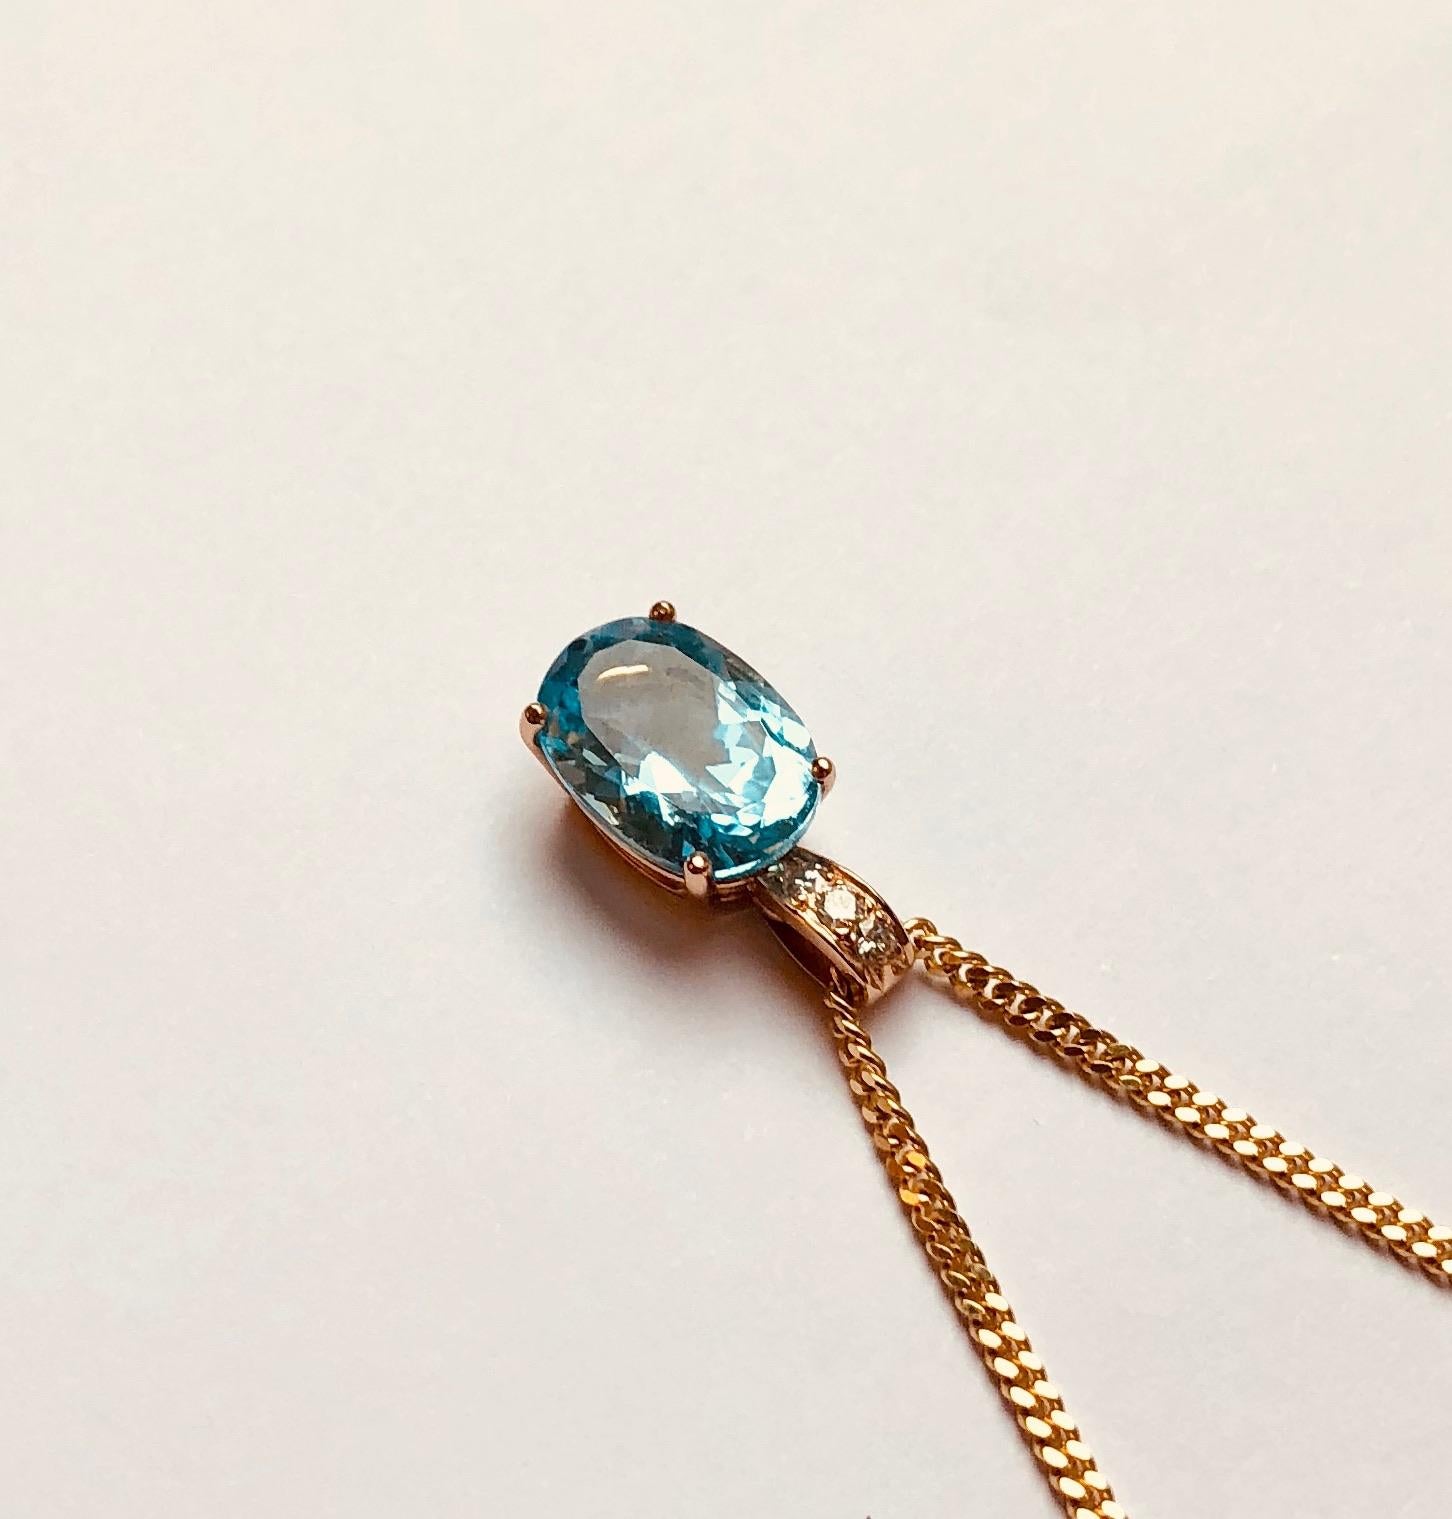 This pendant features an exquisite oval shaped blue topaz. This pendant was designed and made by Van der Veken, an Antwerp, Belgium-based High Jewelry house founded in 1952.

Each jewel is unique, crafted entirely by hand and comes with a lifetime